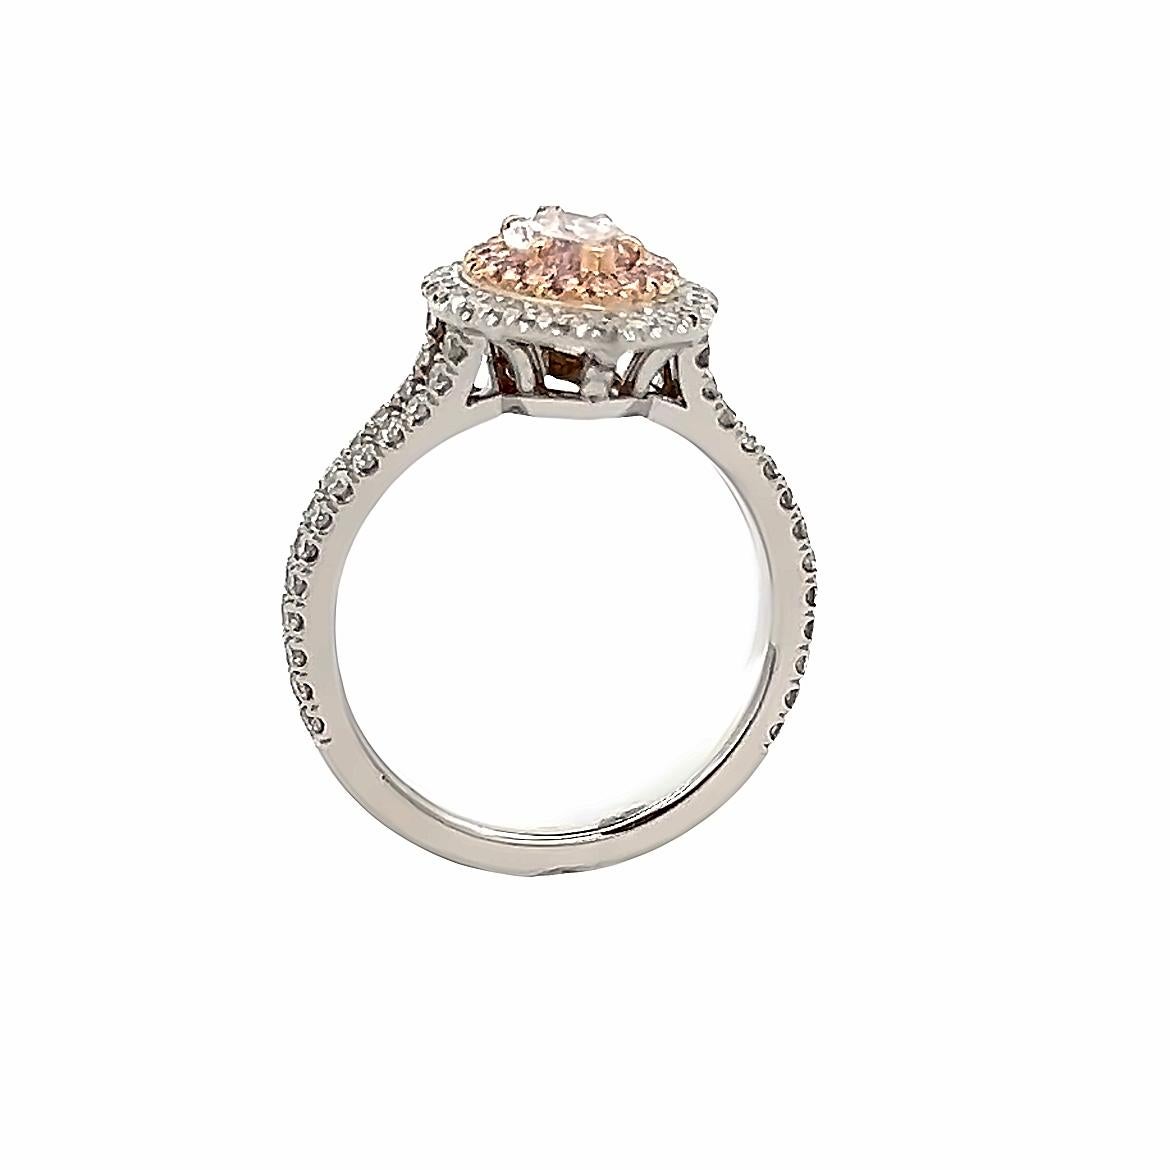 1.95CT Total Weight MQ Fancy Light Pink Ring Set in PLAT & 18KR For Sale 2